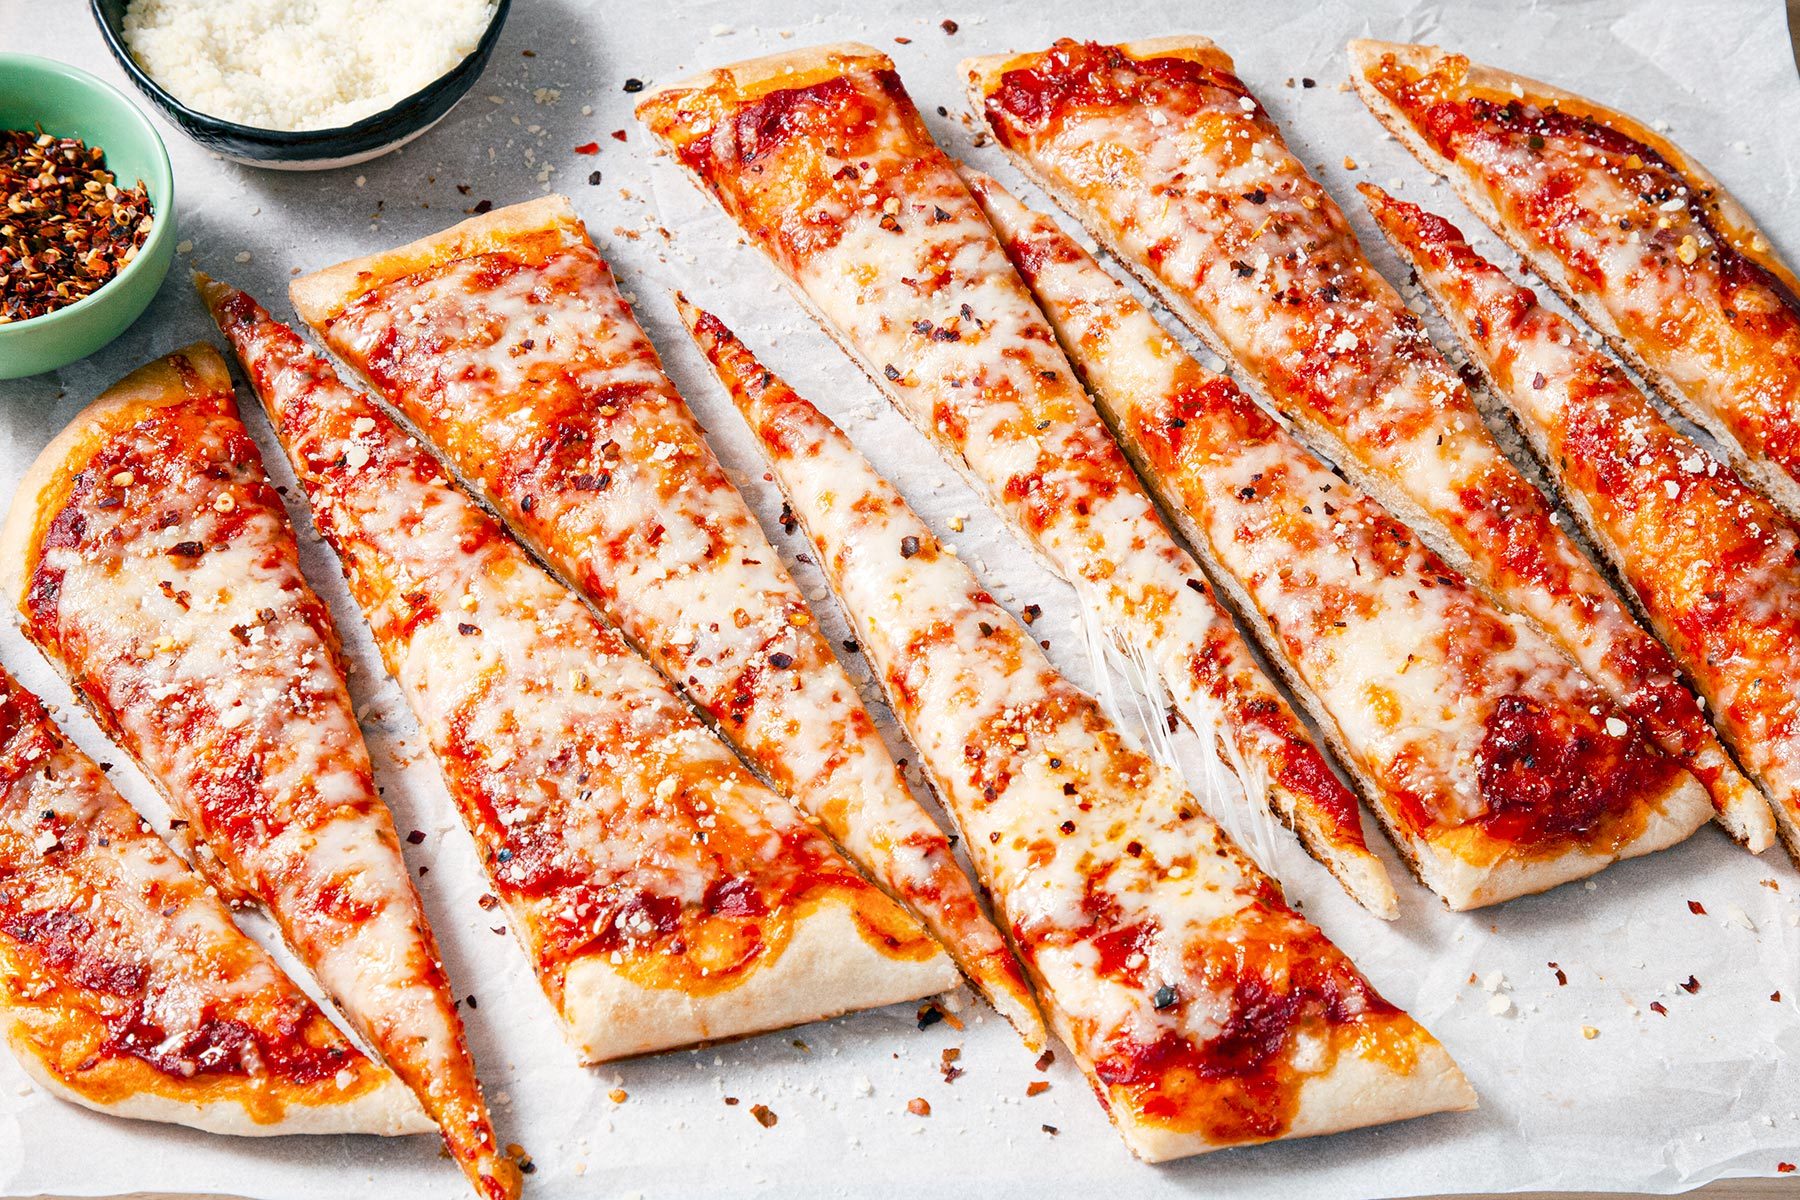 Slices of Flatbread Pizza served with dip